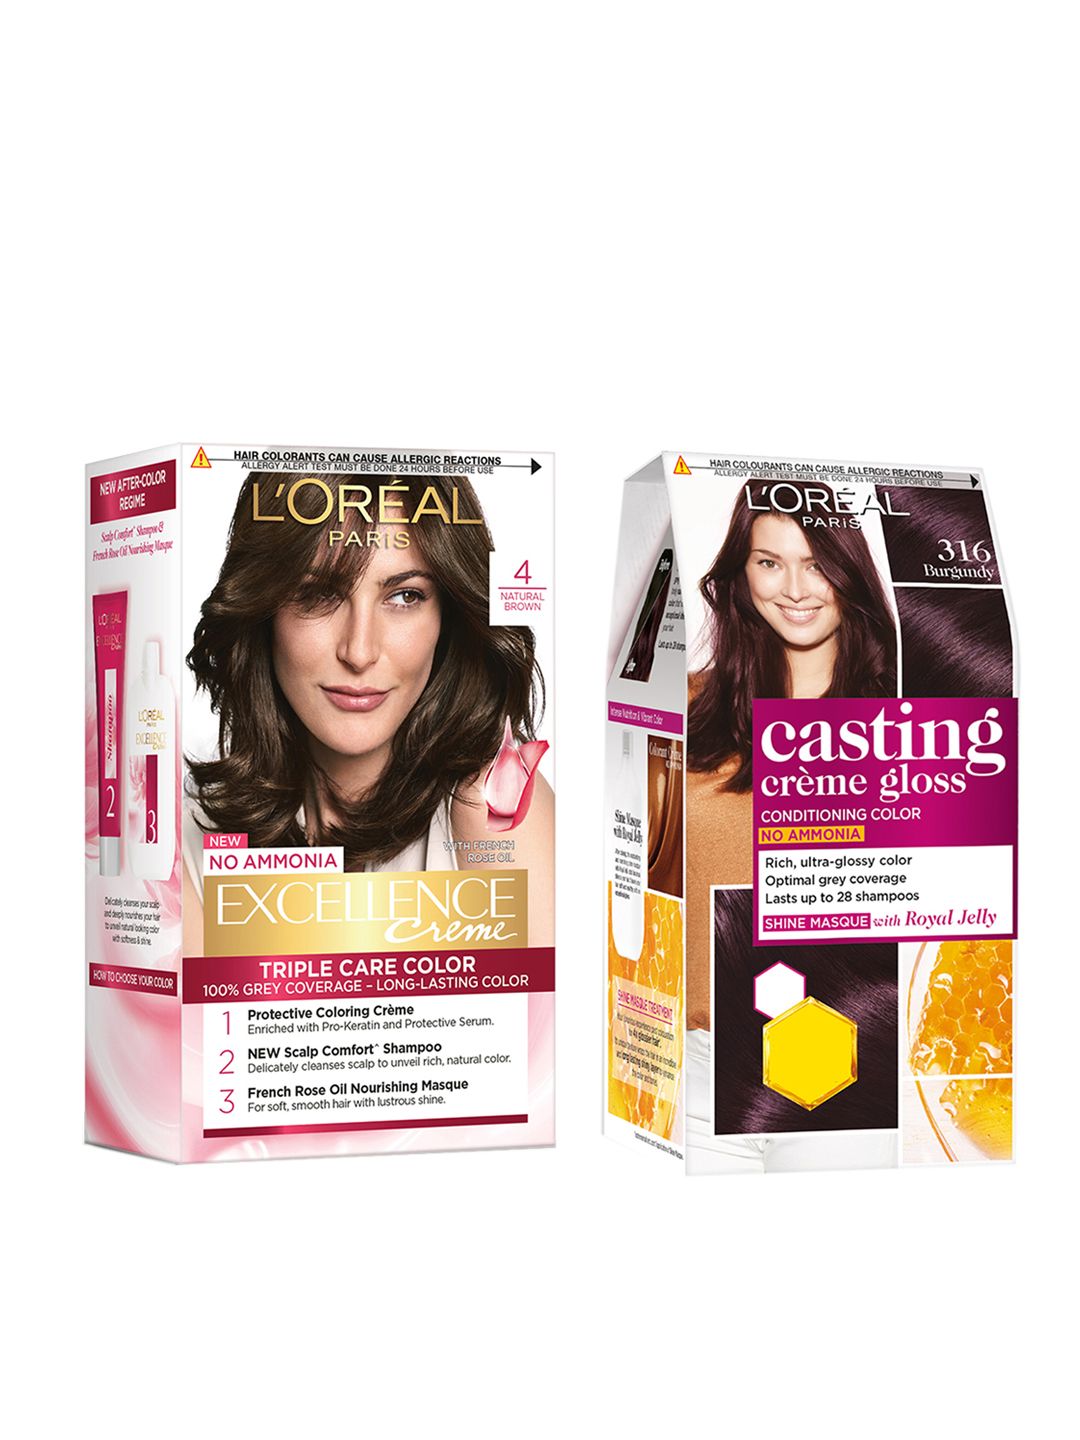 Loreal Set of Excellence Creme & Casting Creme Gloss Hair Colour Price in India